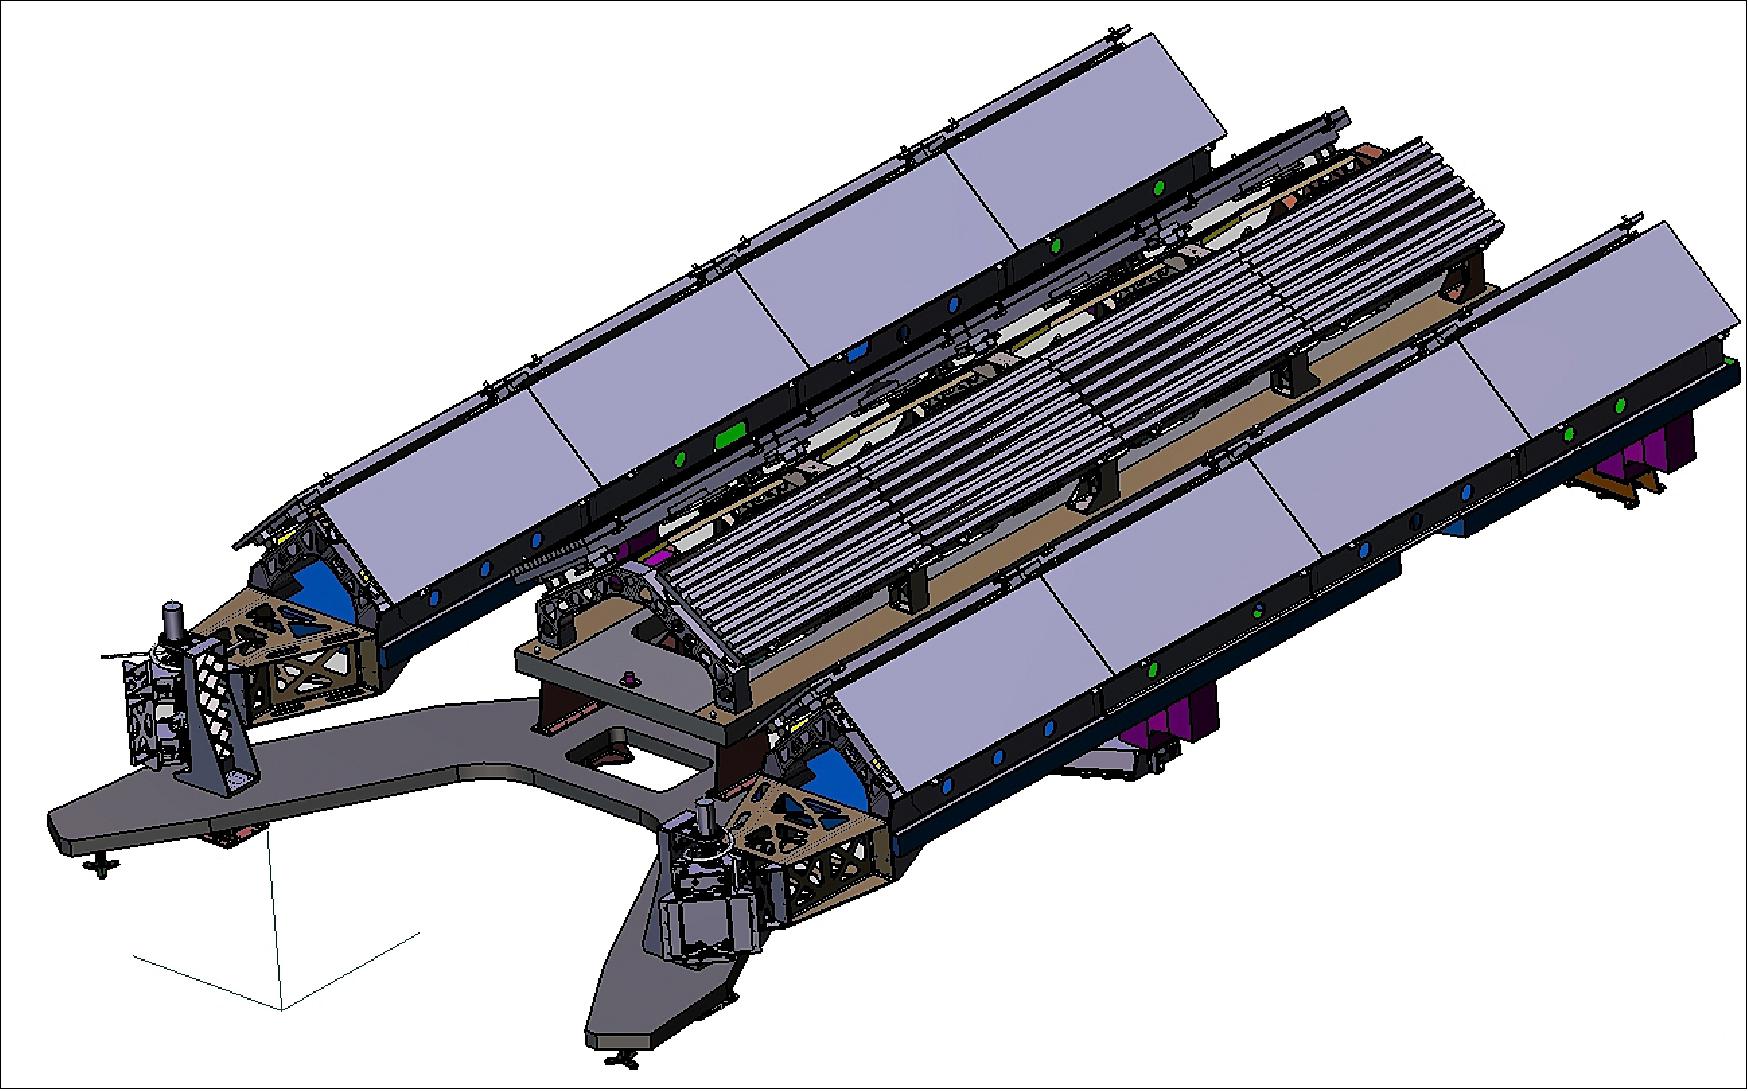 Figure 29: Illustration of the stowed SAS (image credit: Airbus DS)